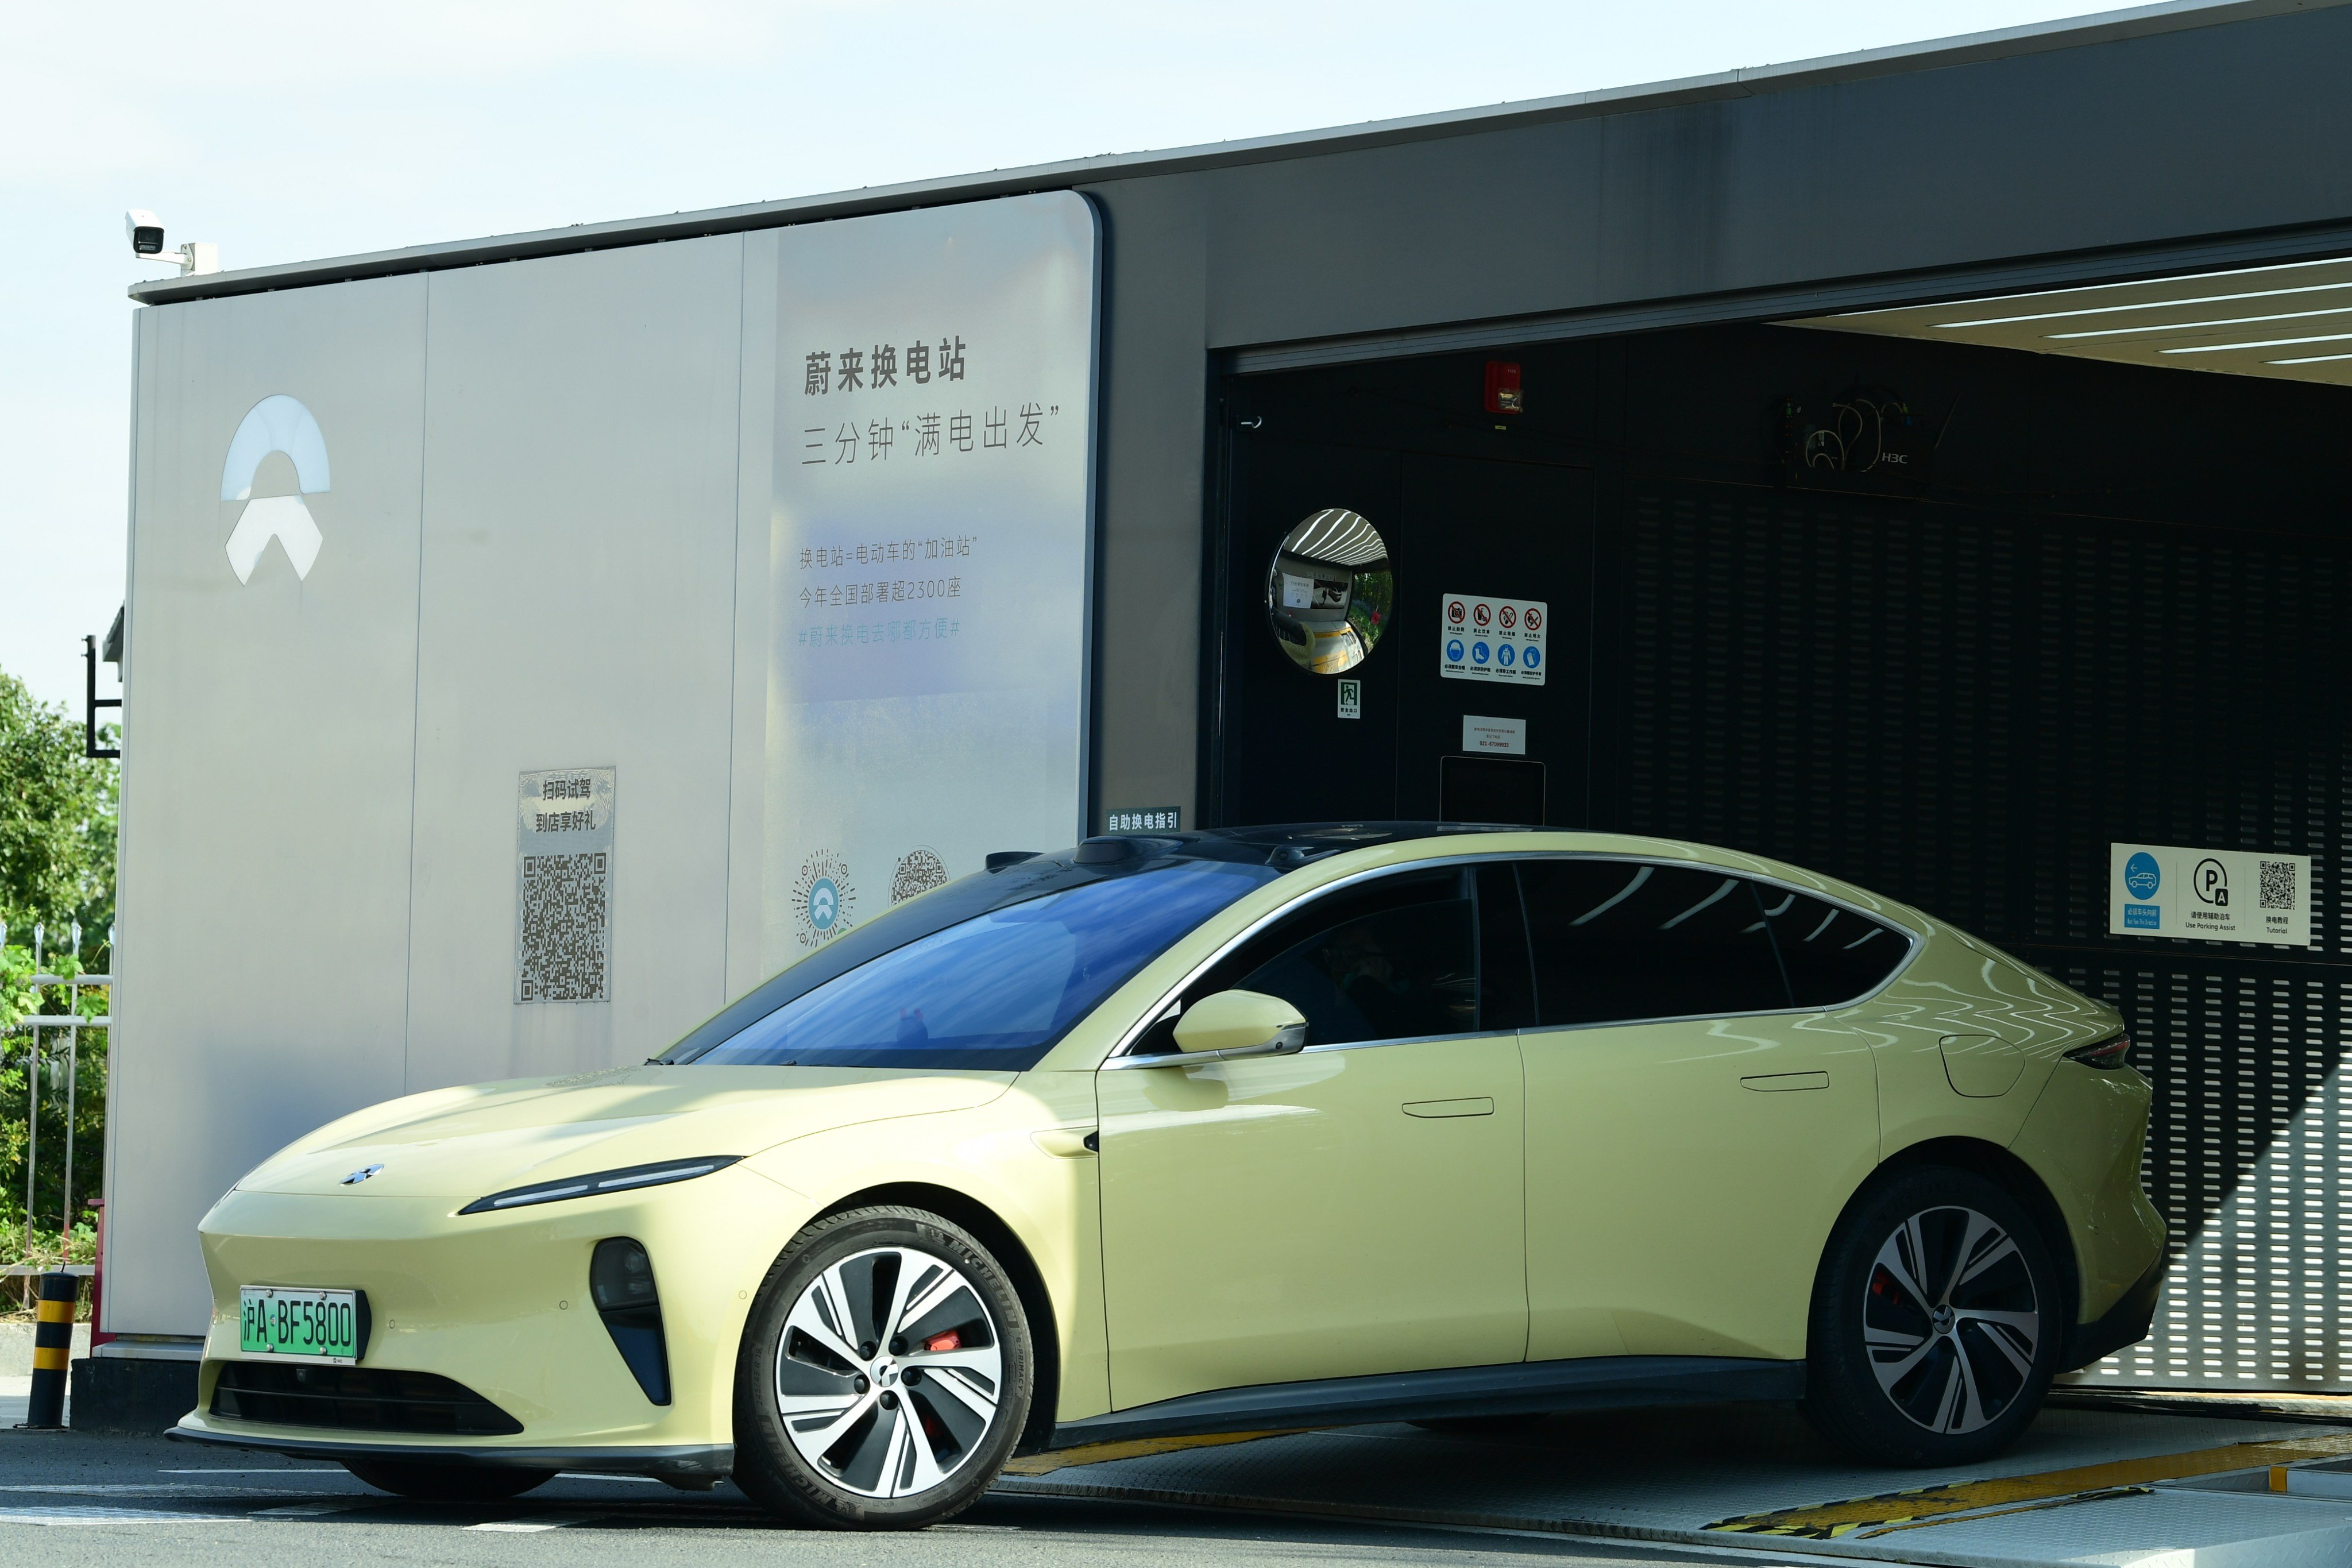 A Nio battery swap station in Taicang, in China’s Jiangsu province. The EV maker and CATL are already partnering on swappable batteries. Photo: Getty Images